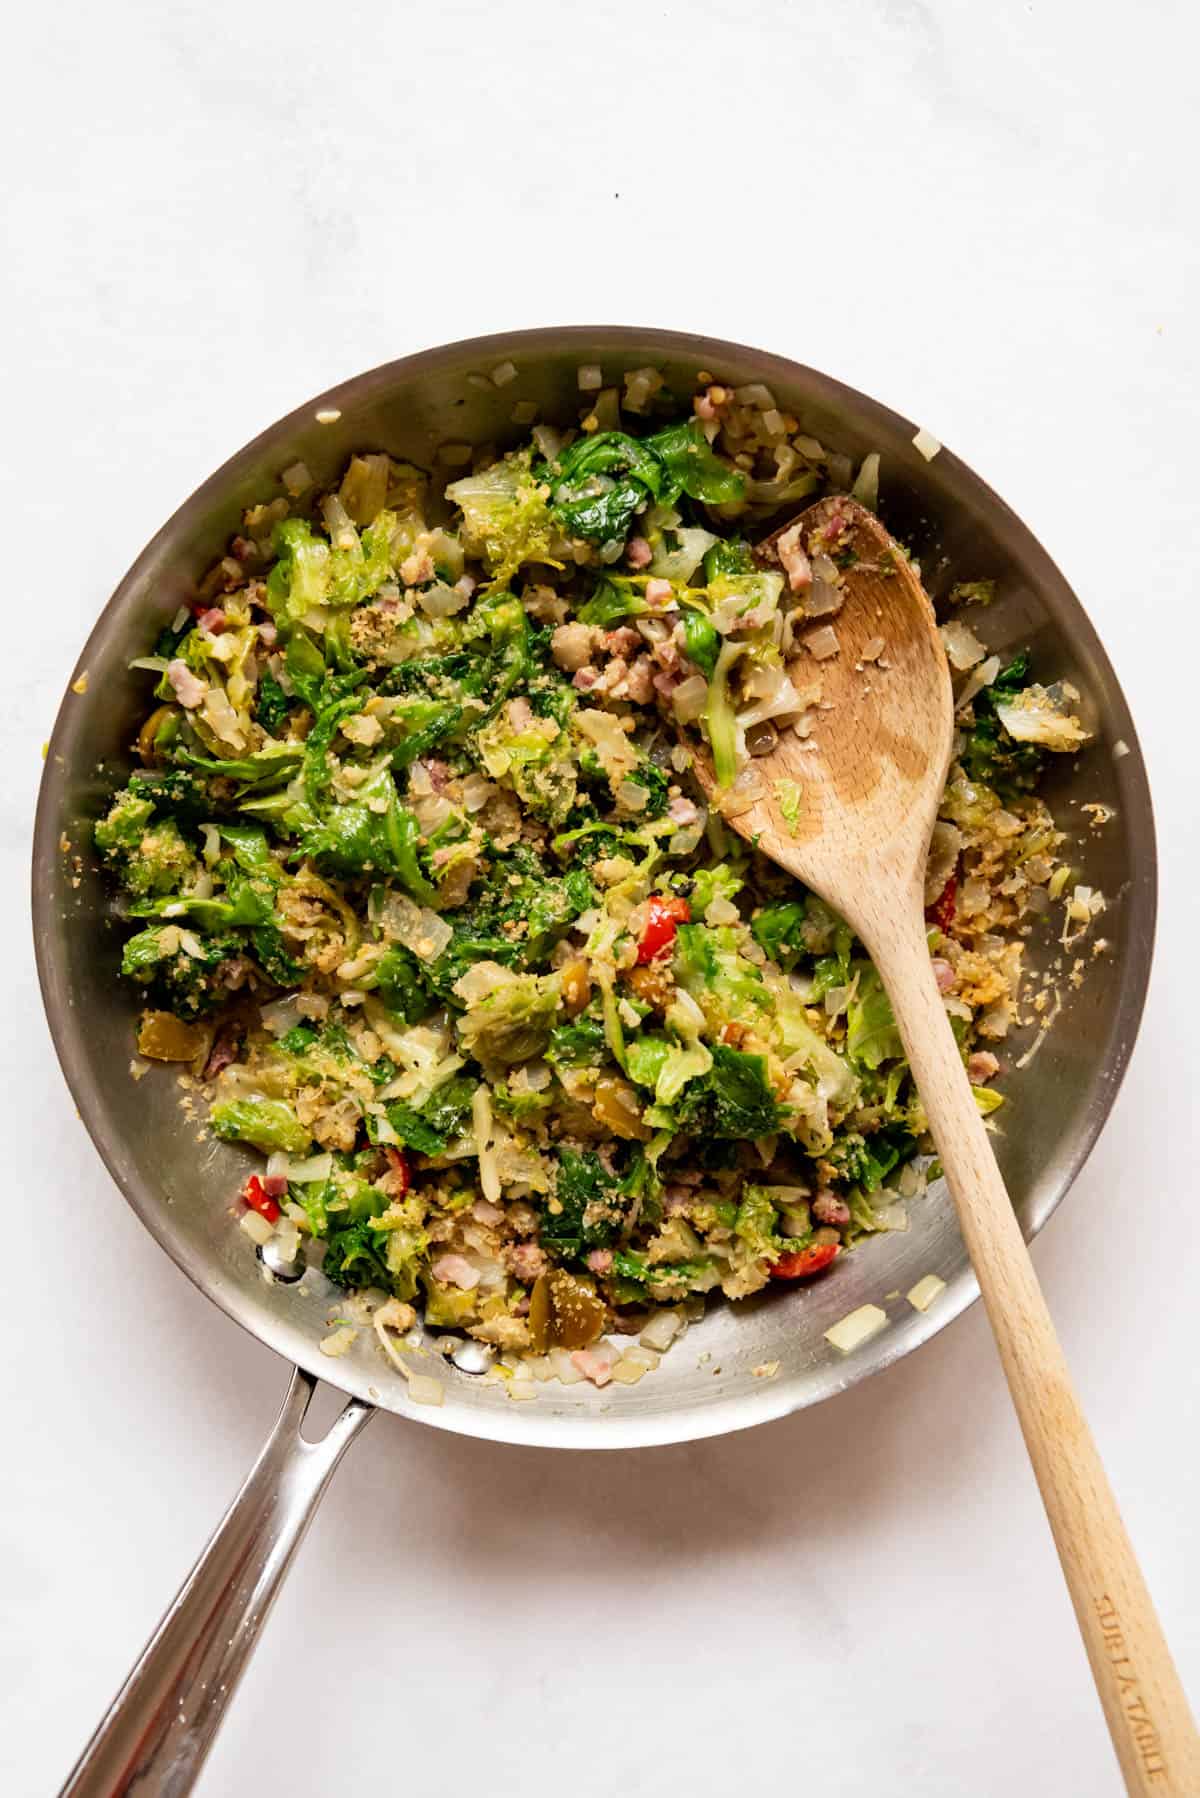 Combined Utica greens ingredients in a pan with a spoon.